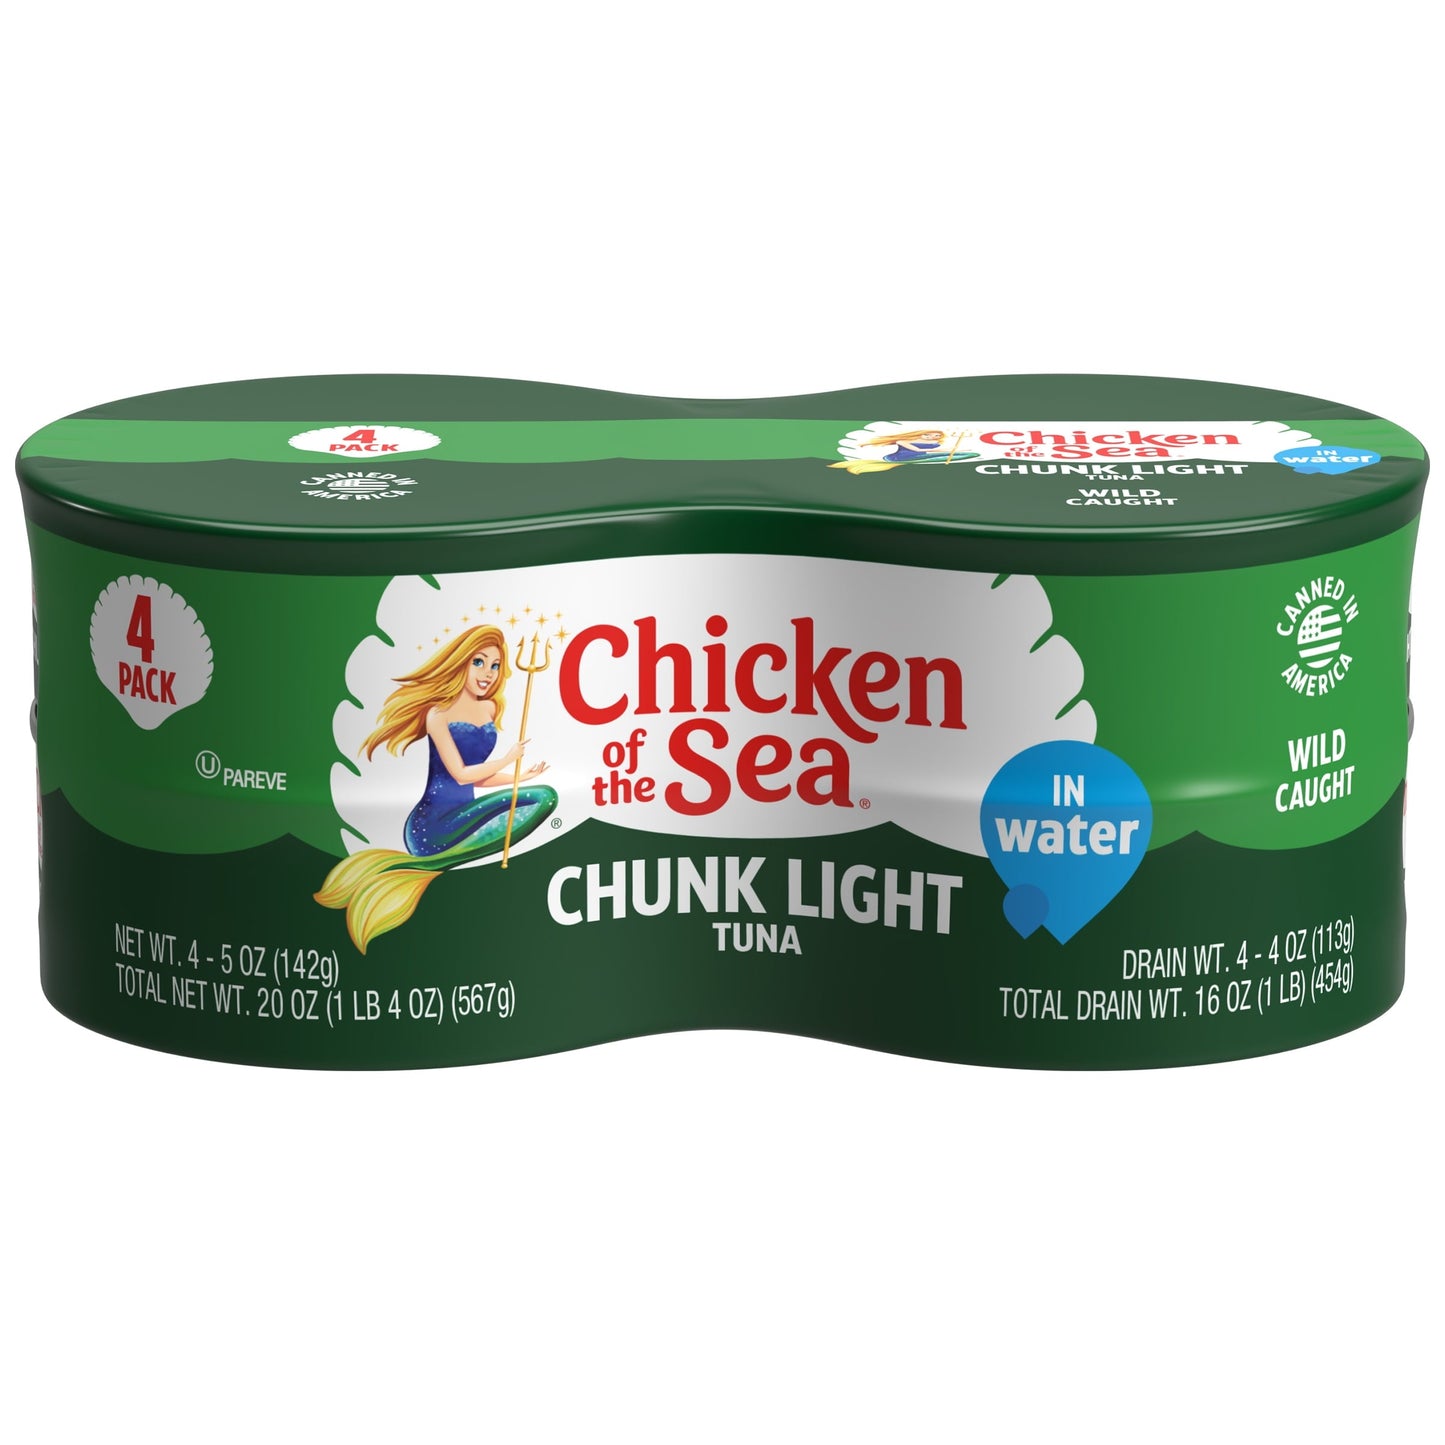 Chicken of the Sea Chunk Light Tuna in Water, 5 oz, 4 Cans